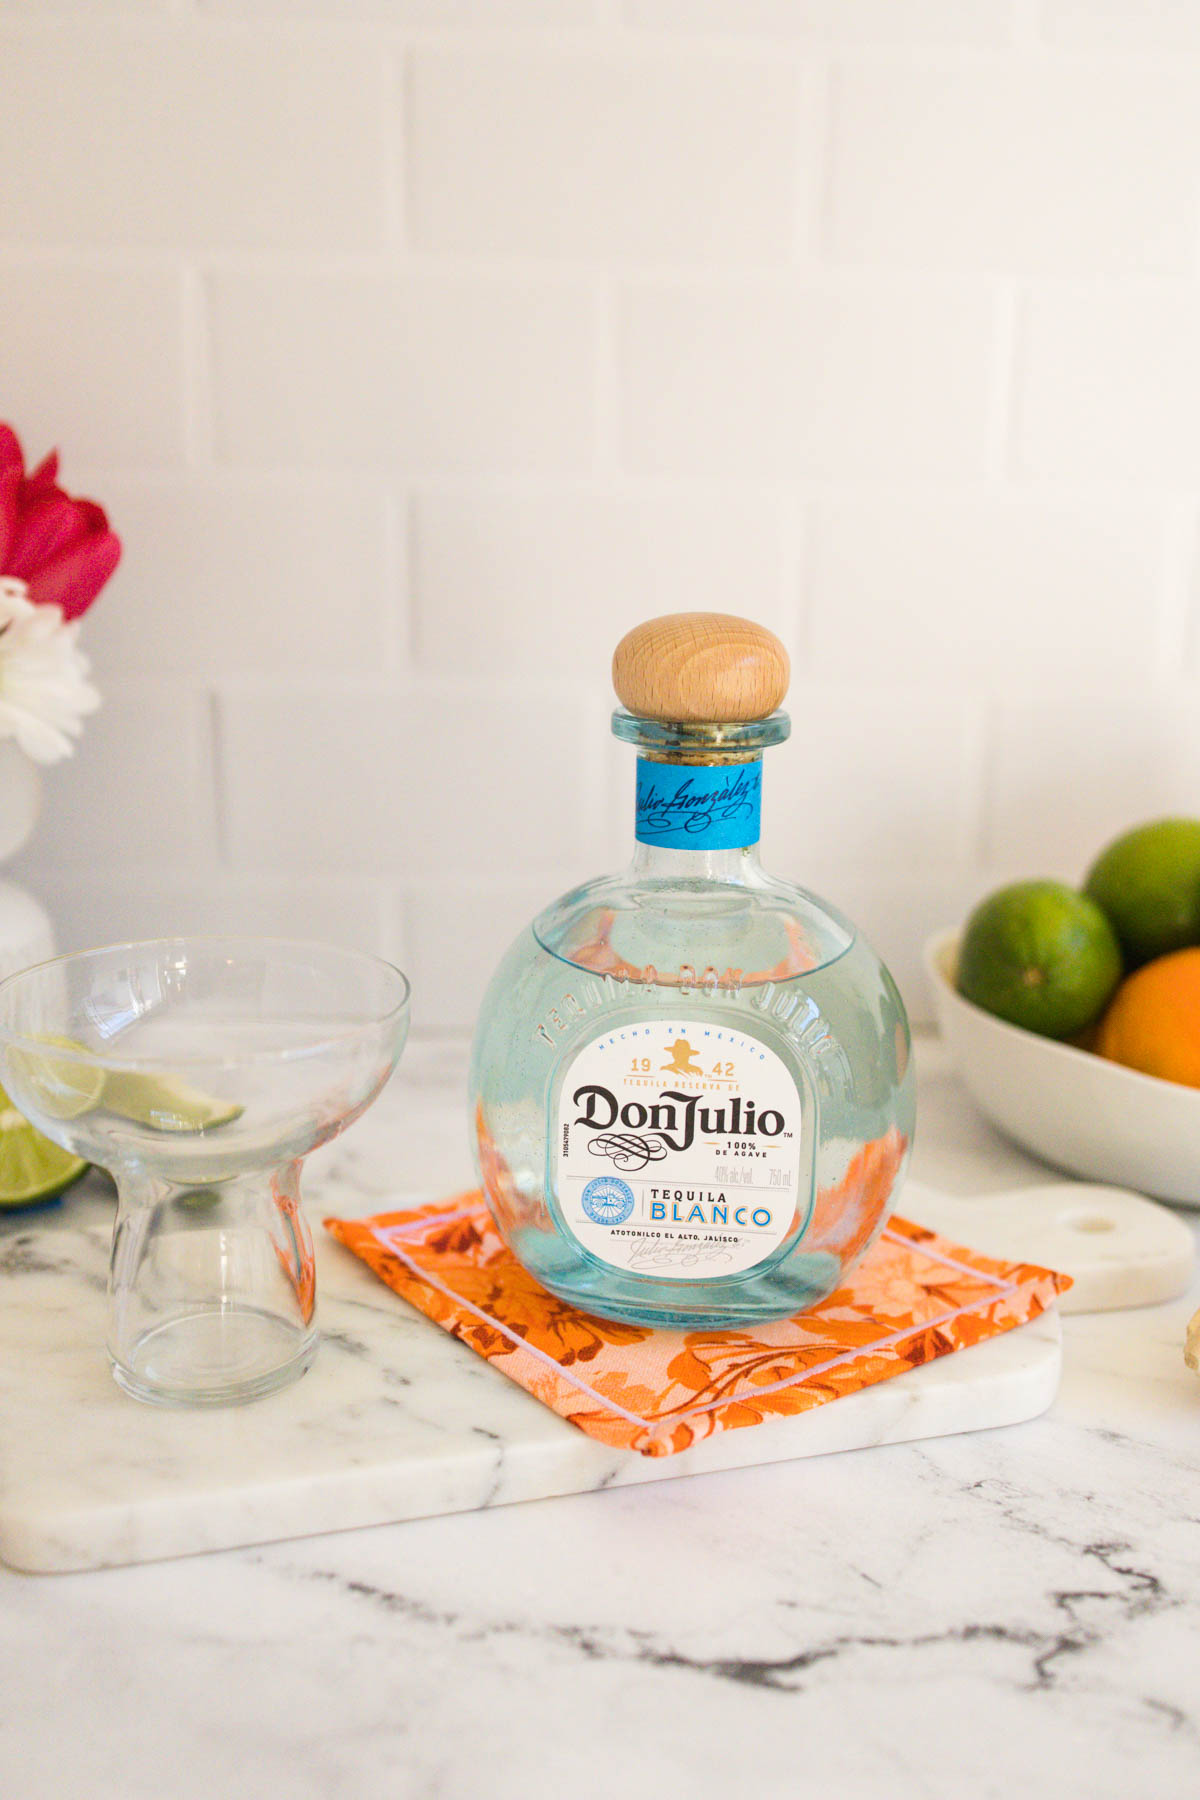 A bottle of Don Julio Blanco Tequila alongside a stemless margarita glass on a marble counter.